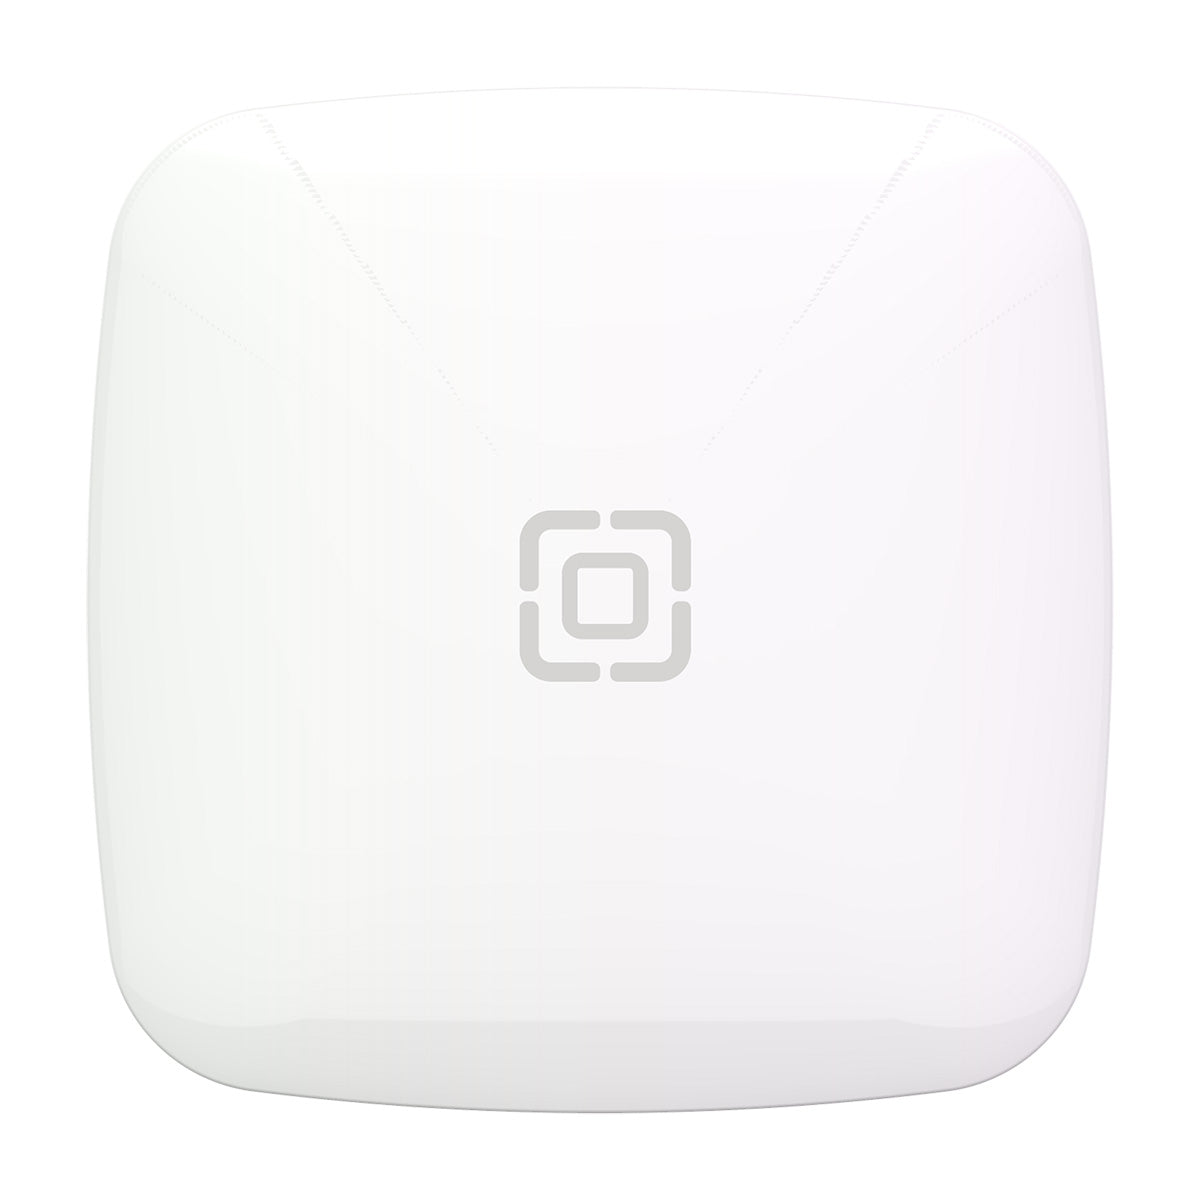 Pearl White | 5000mAh Power Bank with Compact Mirror - Pearl White